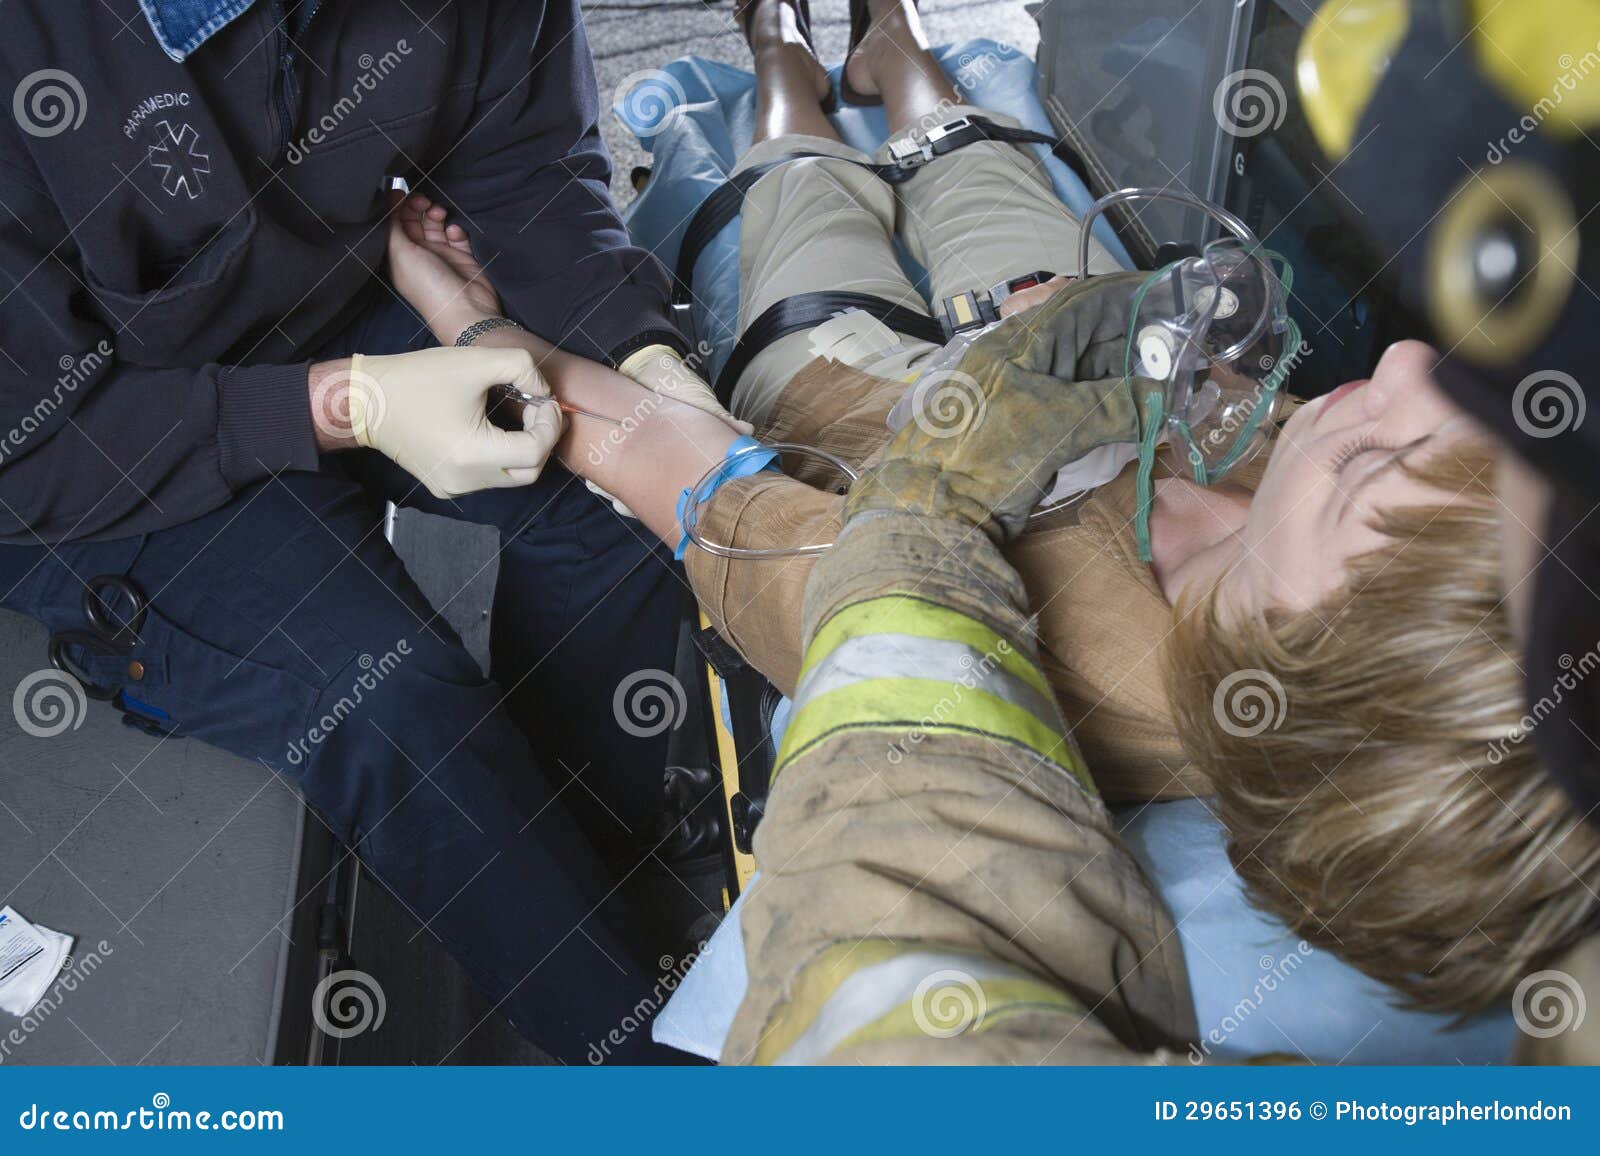 firefighter and emt doctor helping an injured patient